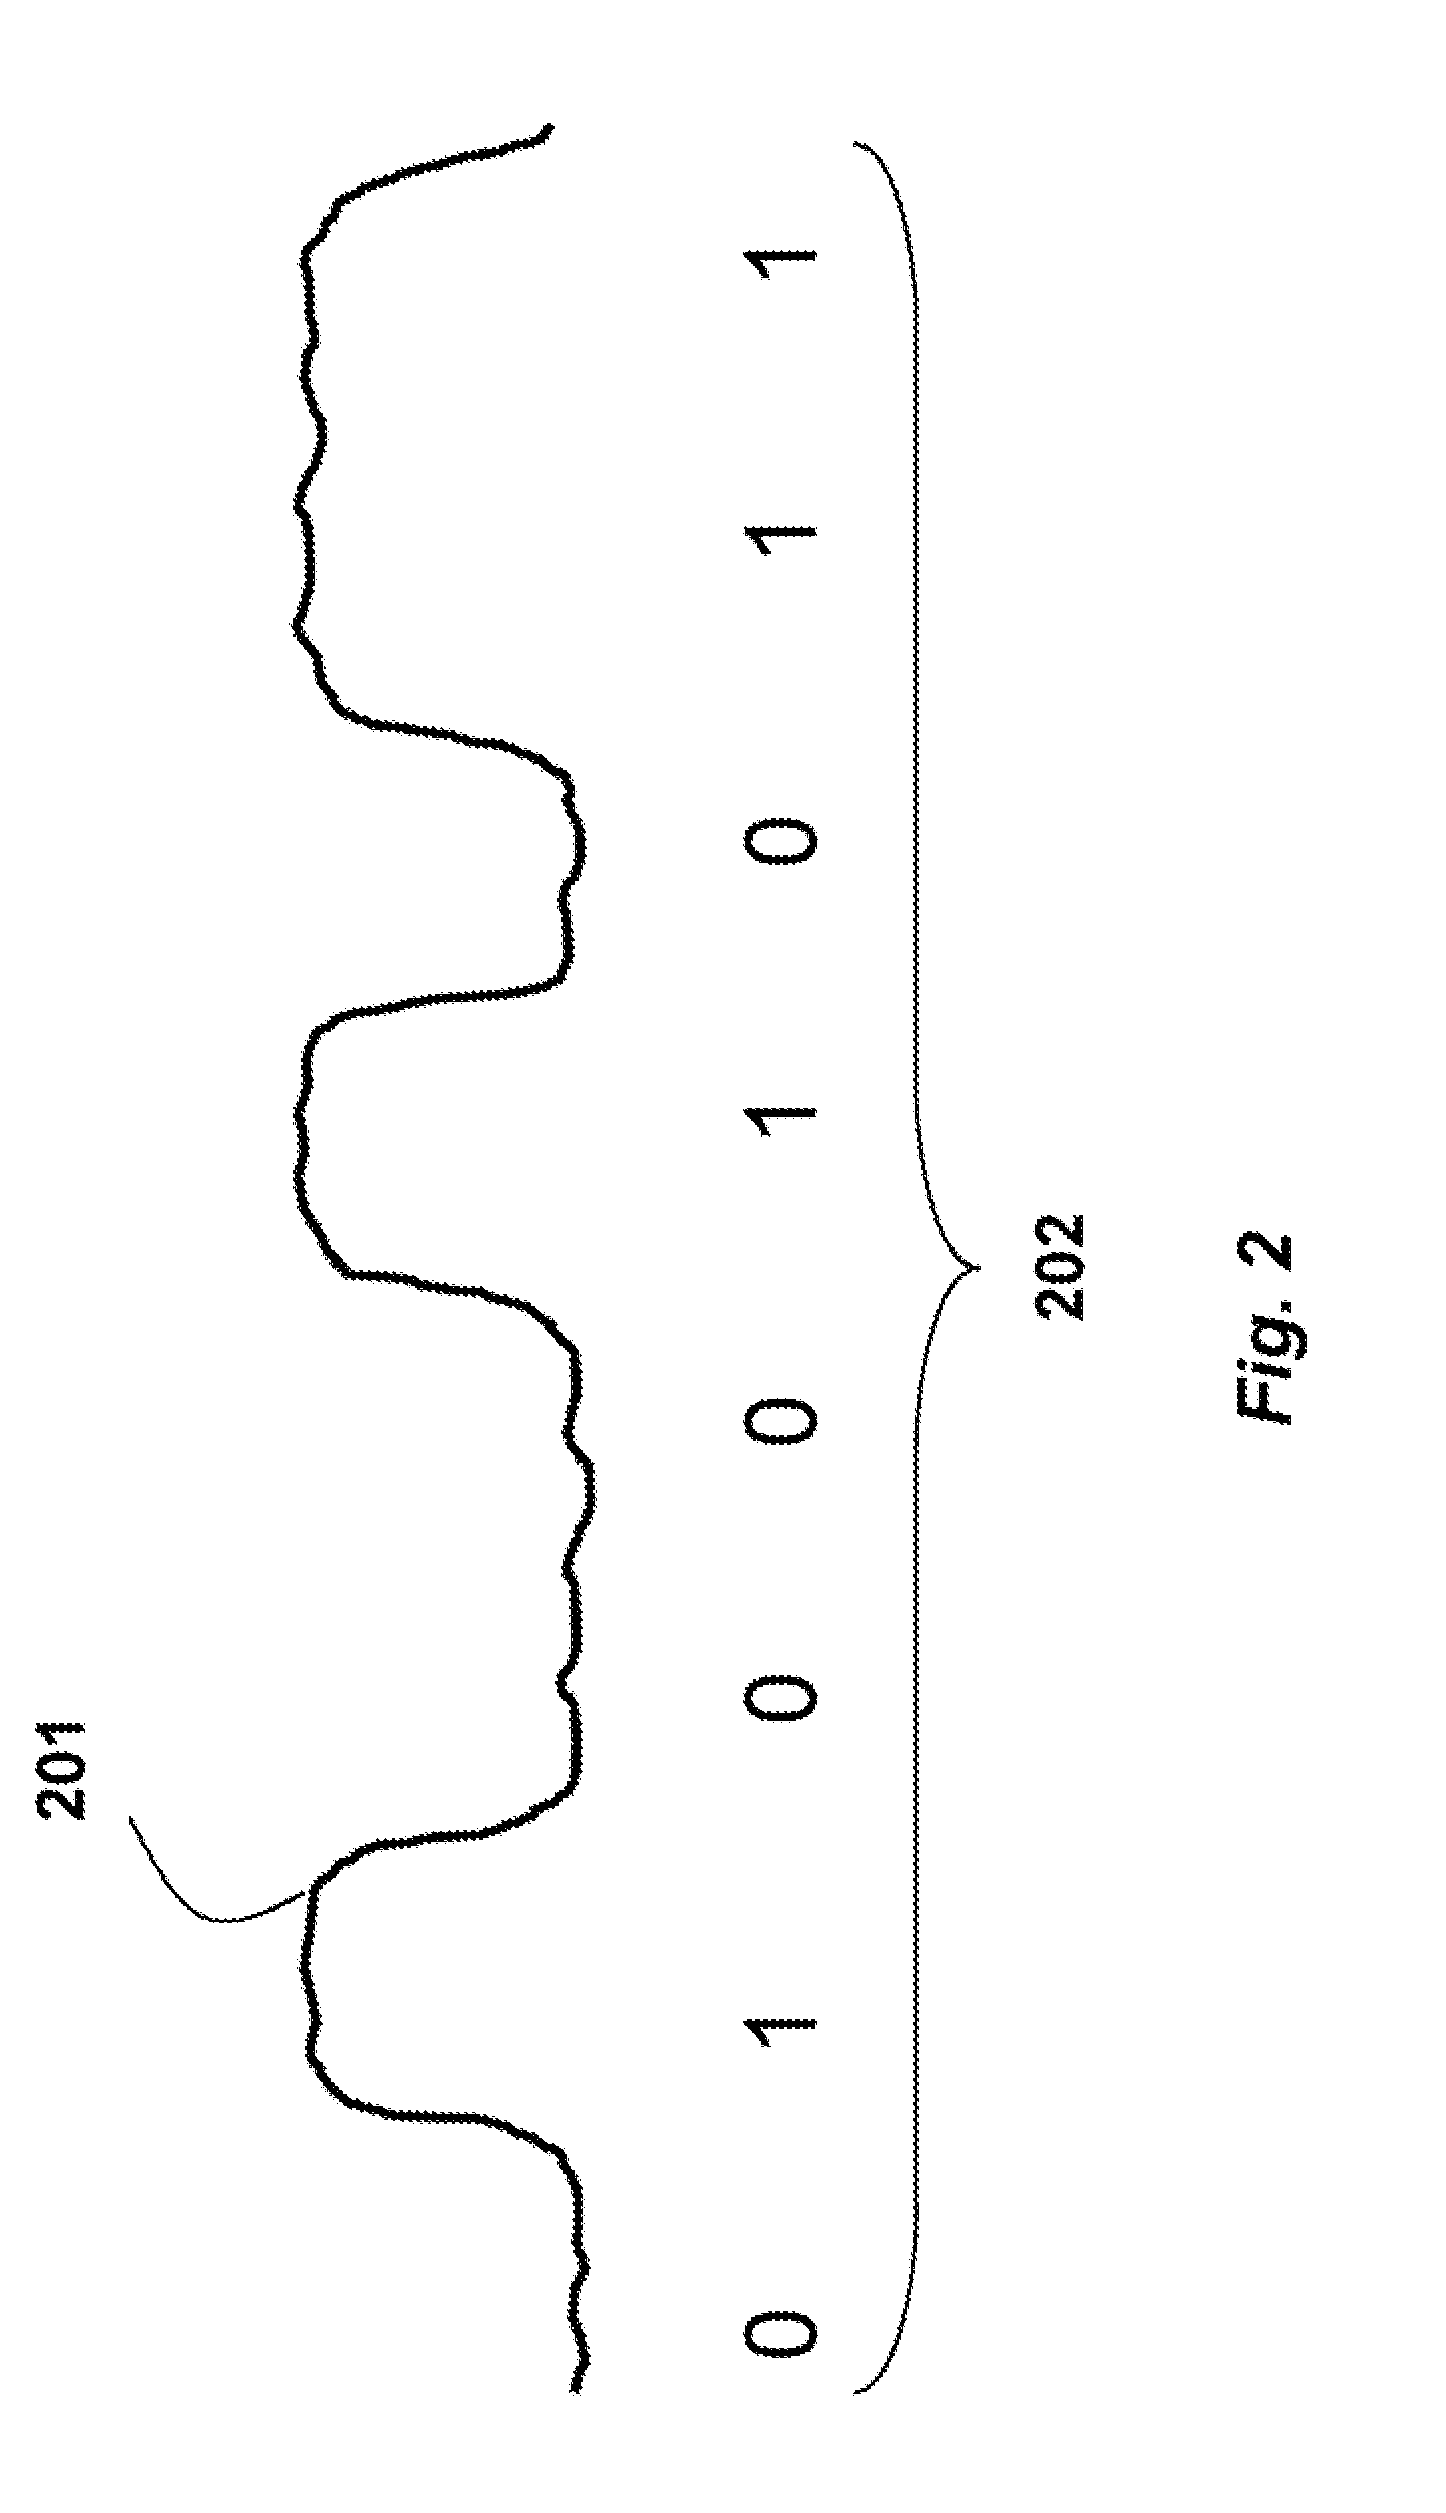 Method for Estimating Positions Using Absolute Encoders